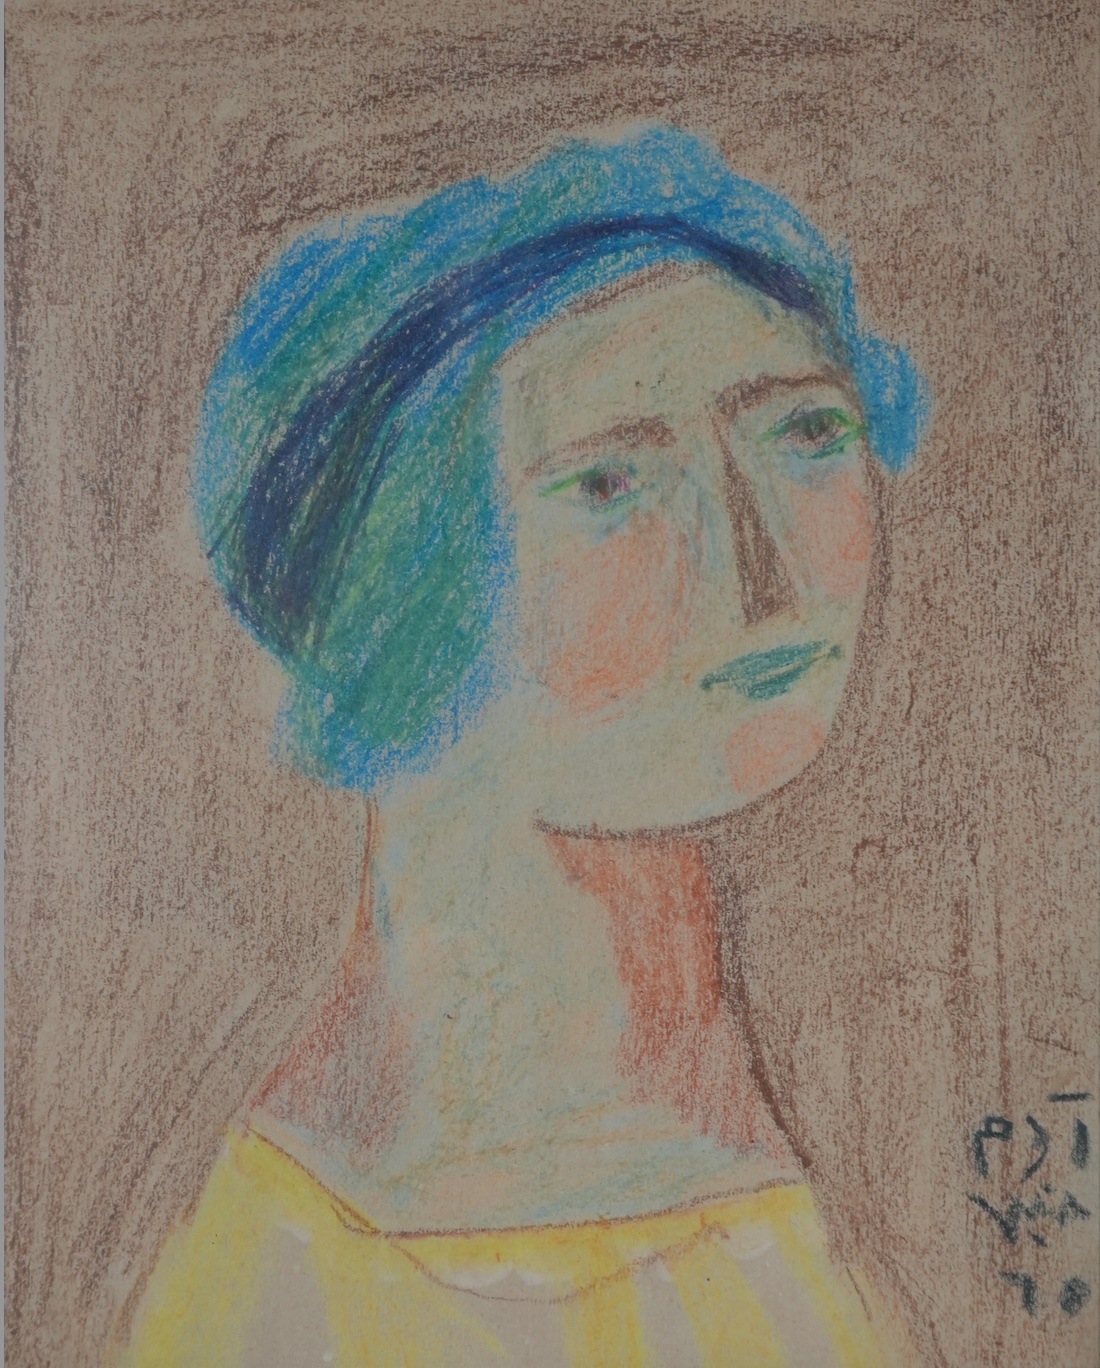 Adam Henein (1925-2021)  15 x 20 cm Mixed media on paper Signed and dated 1965 or 1960? MG-107-AH